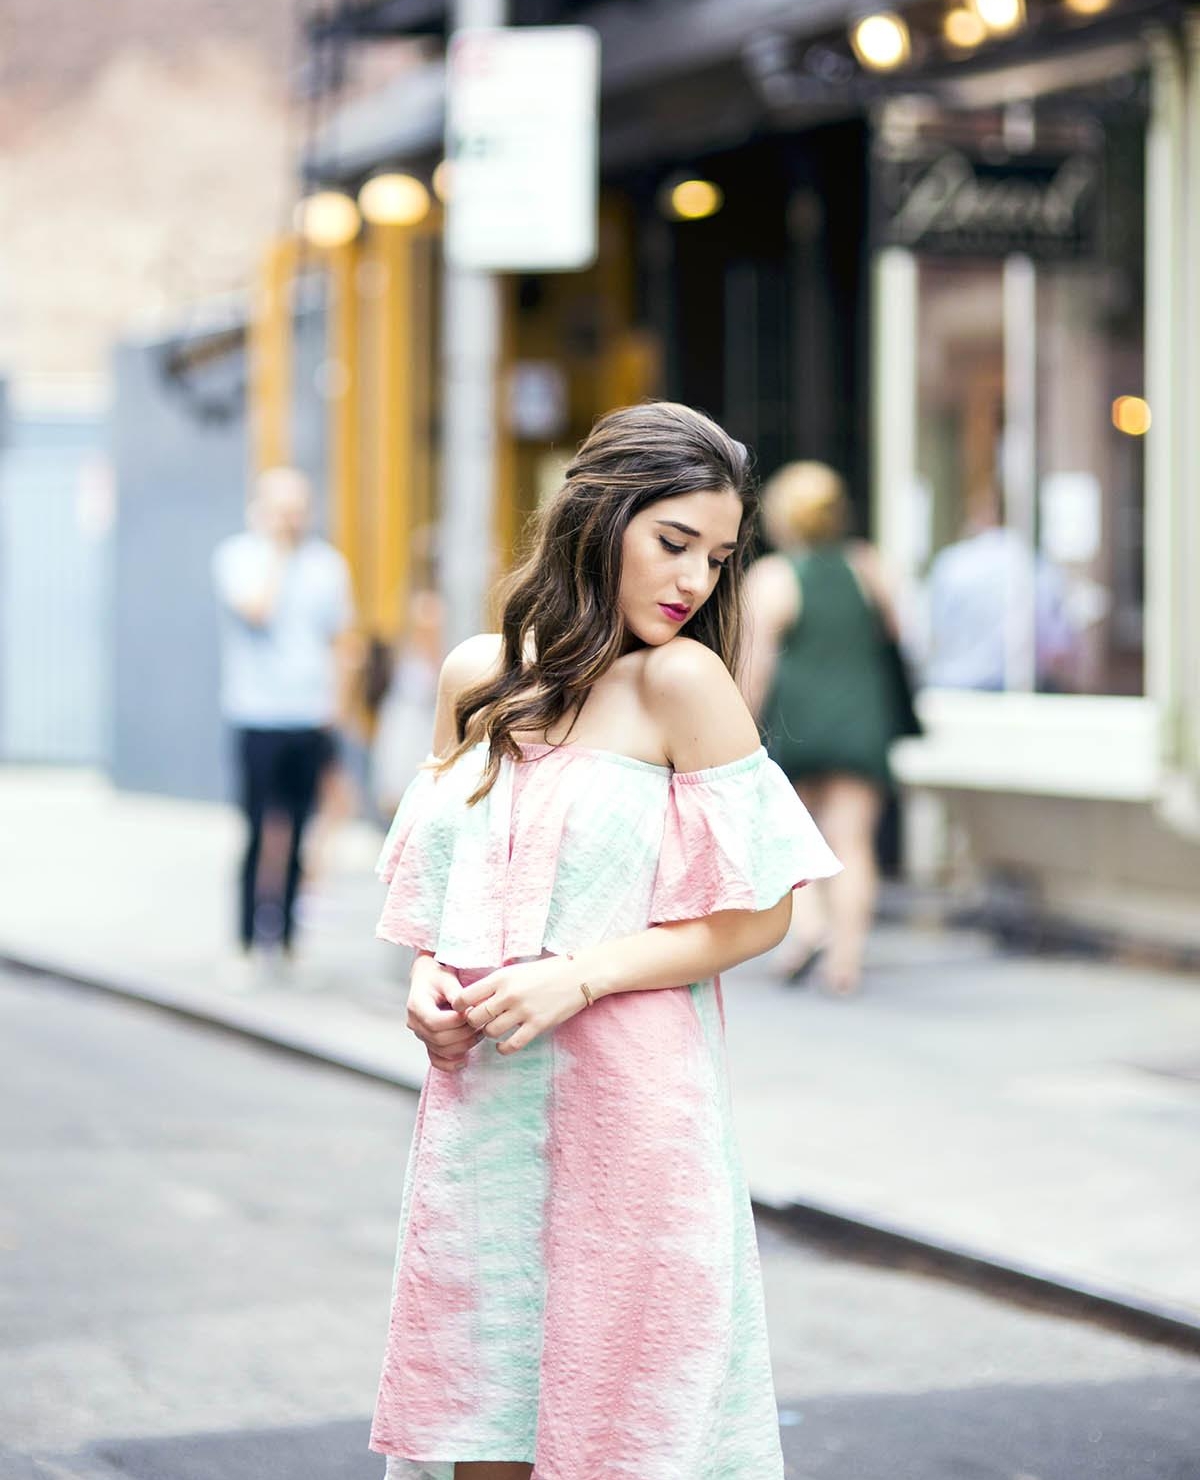 Pastel Tie-Dye Dress Shop Trescool Louboutins & Love Fashion Blog Esther Santer NYC Street Style Blogger Outfit OOTD Trendy Cold Shoulders Blue Black Women Girl Hair Curly Brown Green Pink Red Lip Makeup Heels Lace Up Gray Fashion Lady Bracelet Choker.jpg